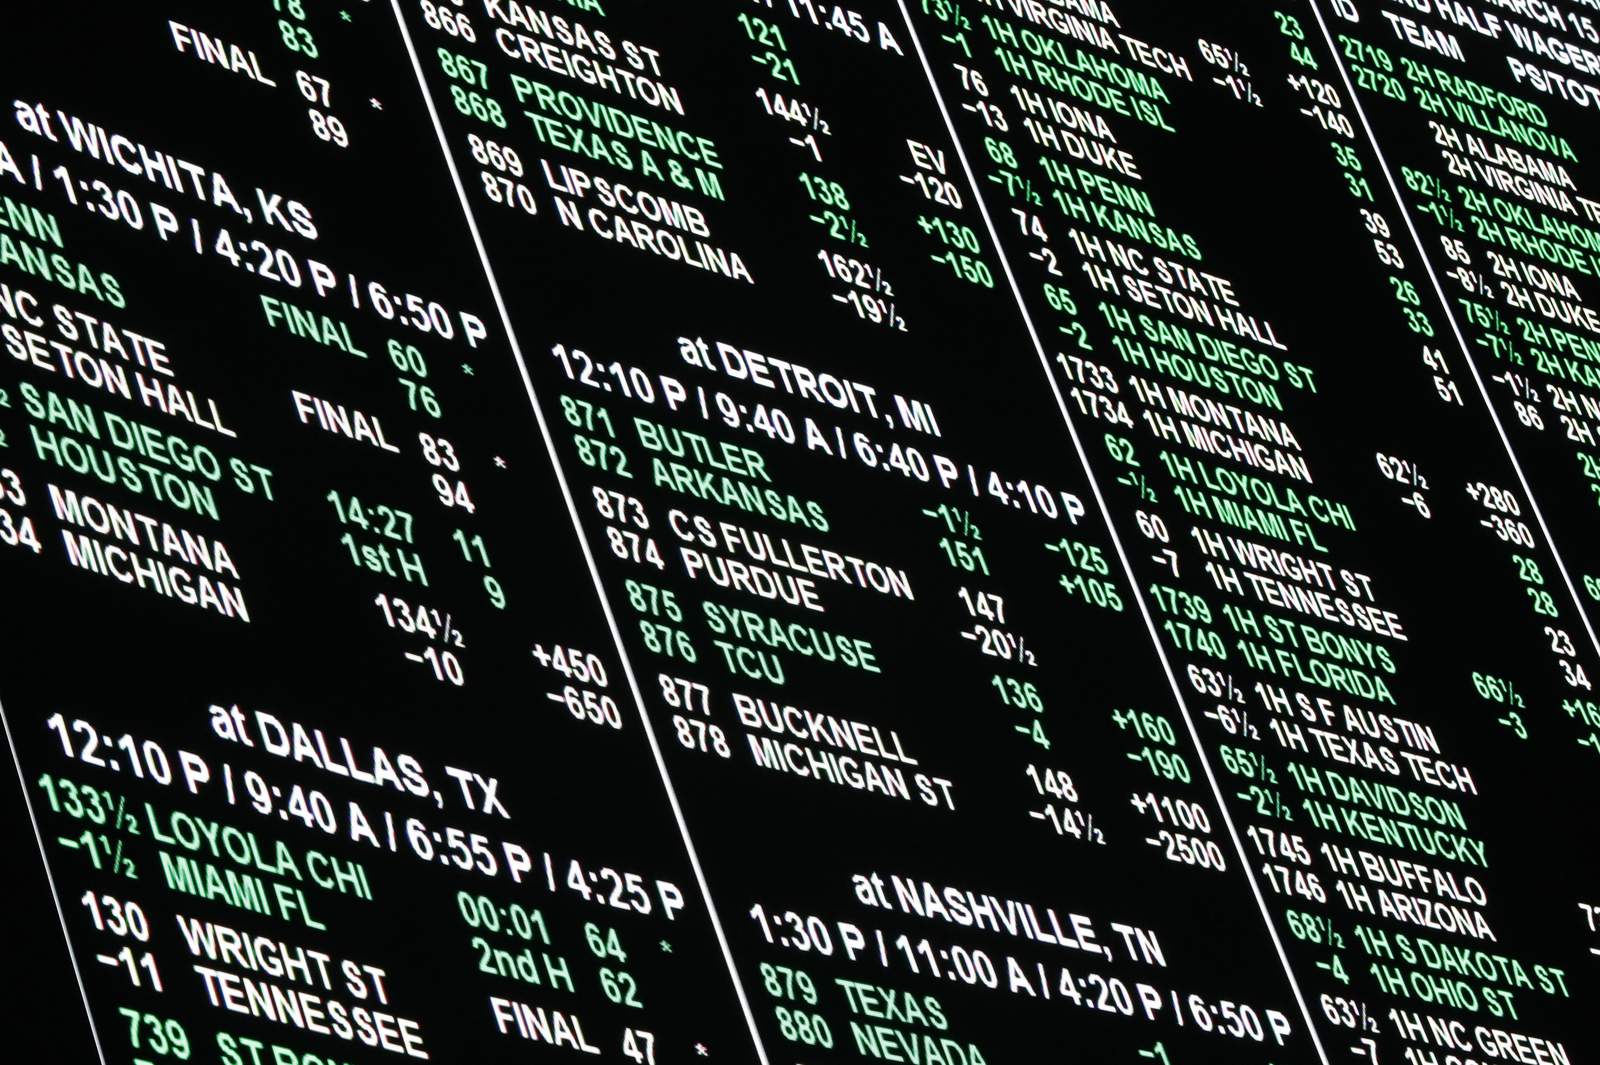 Sportsbooks are dark and odds are long in Las Vegas